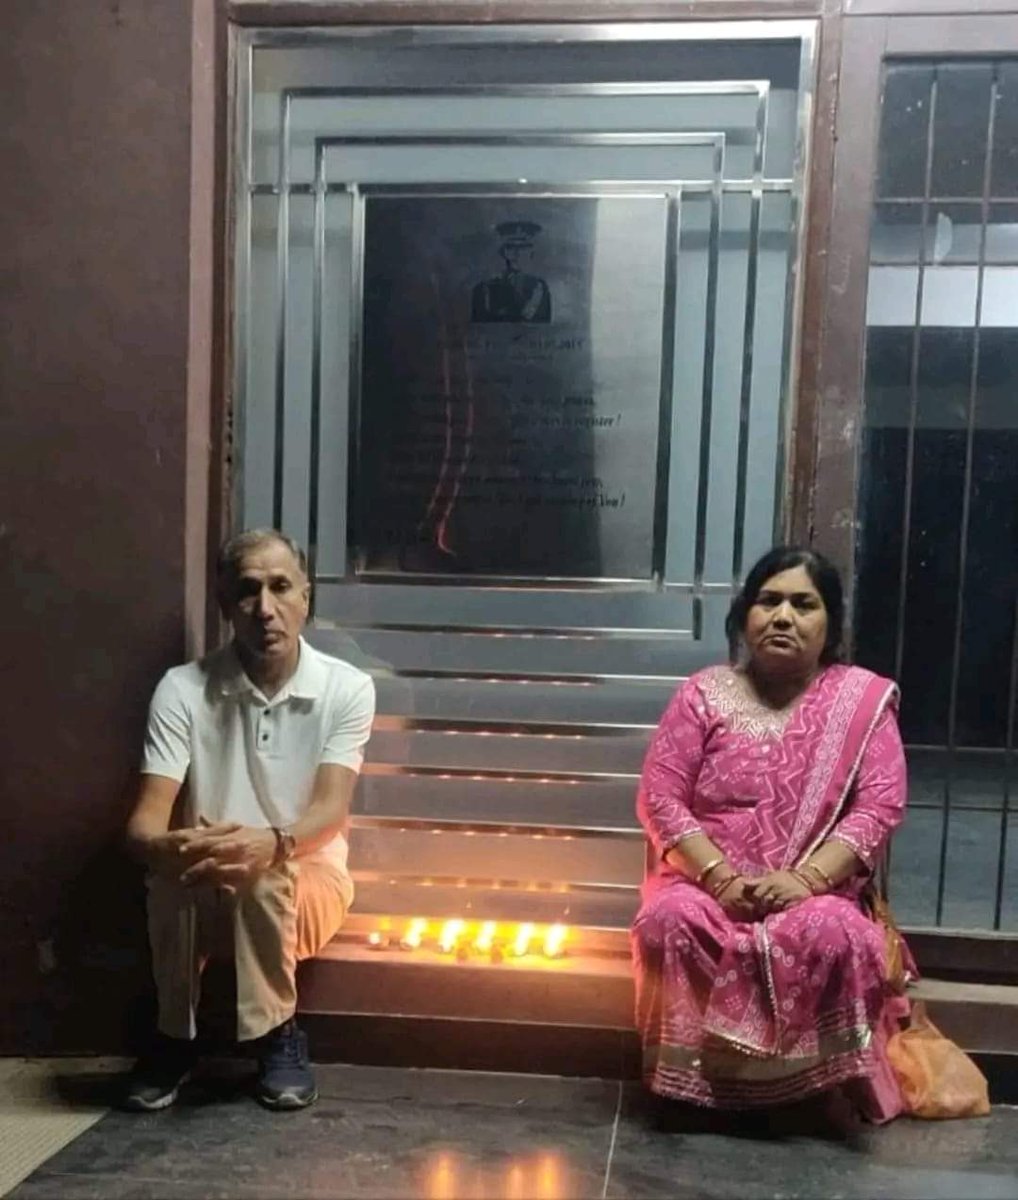 RT @SinghhAbhiishek: Parents of Major Anuj Rajput who was killed in a helicopter crash last year at this Diwali. https://t.co/DRFHR6B3aY